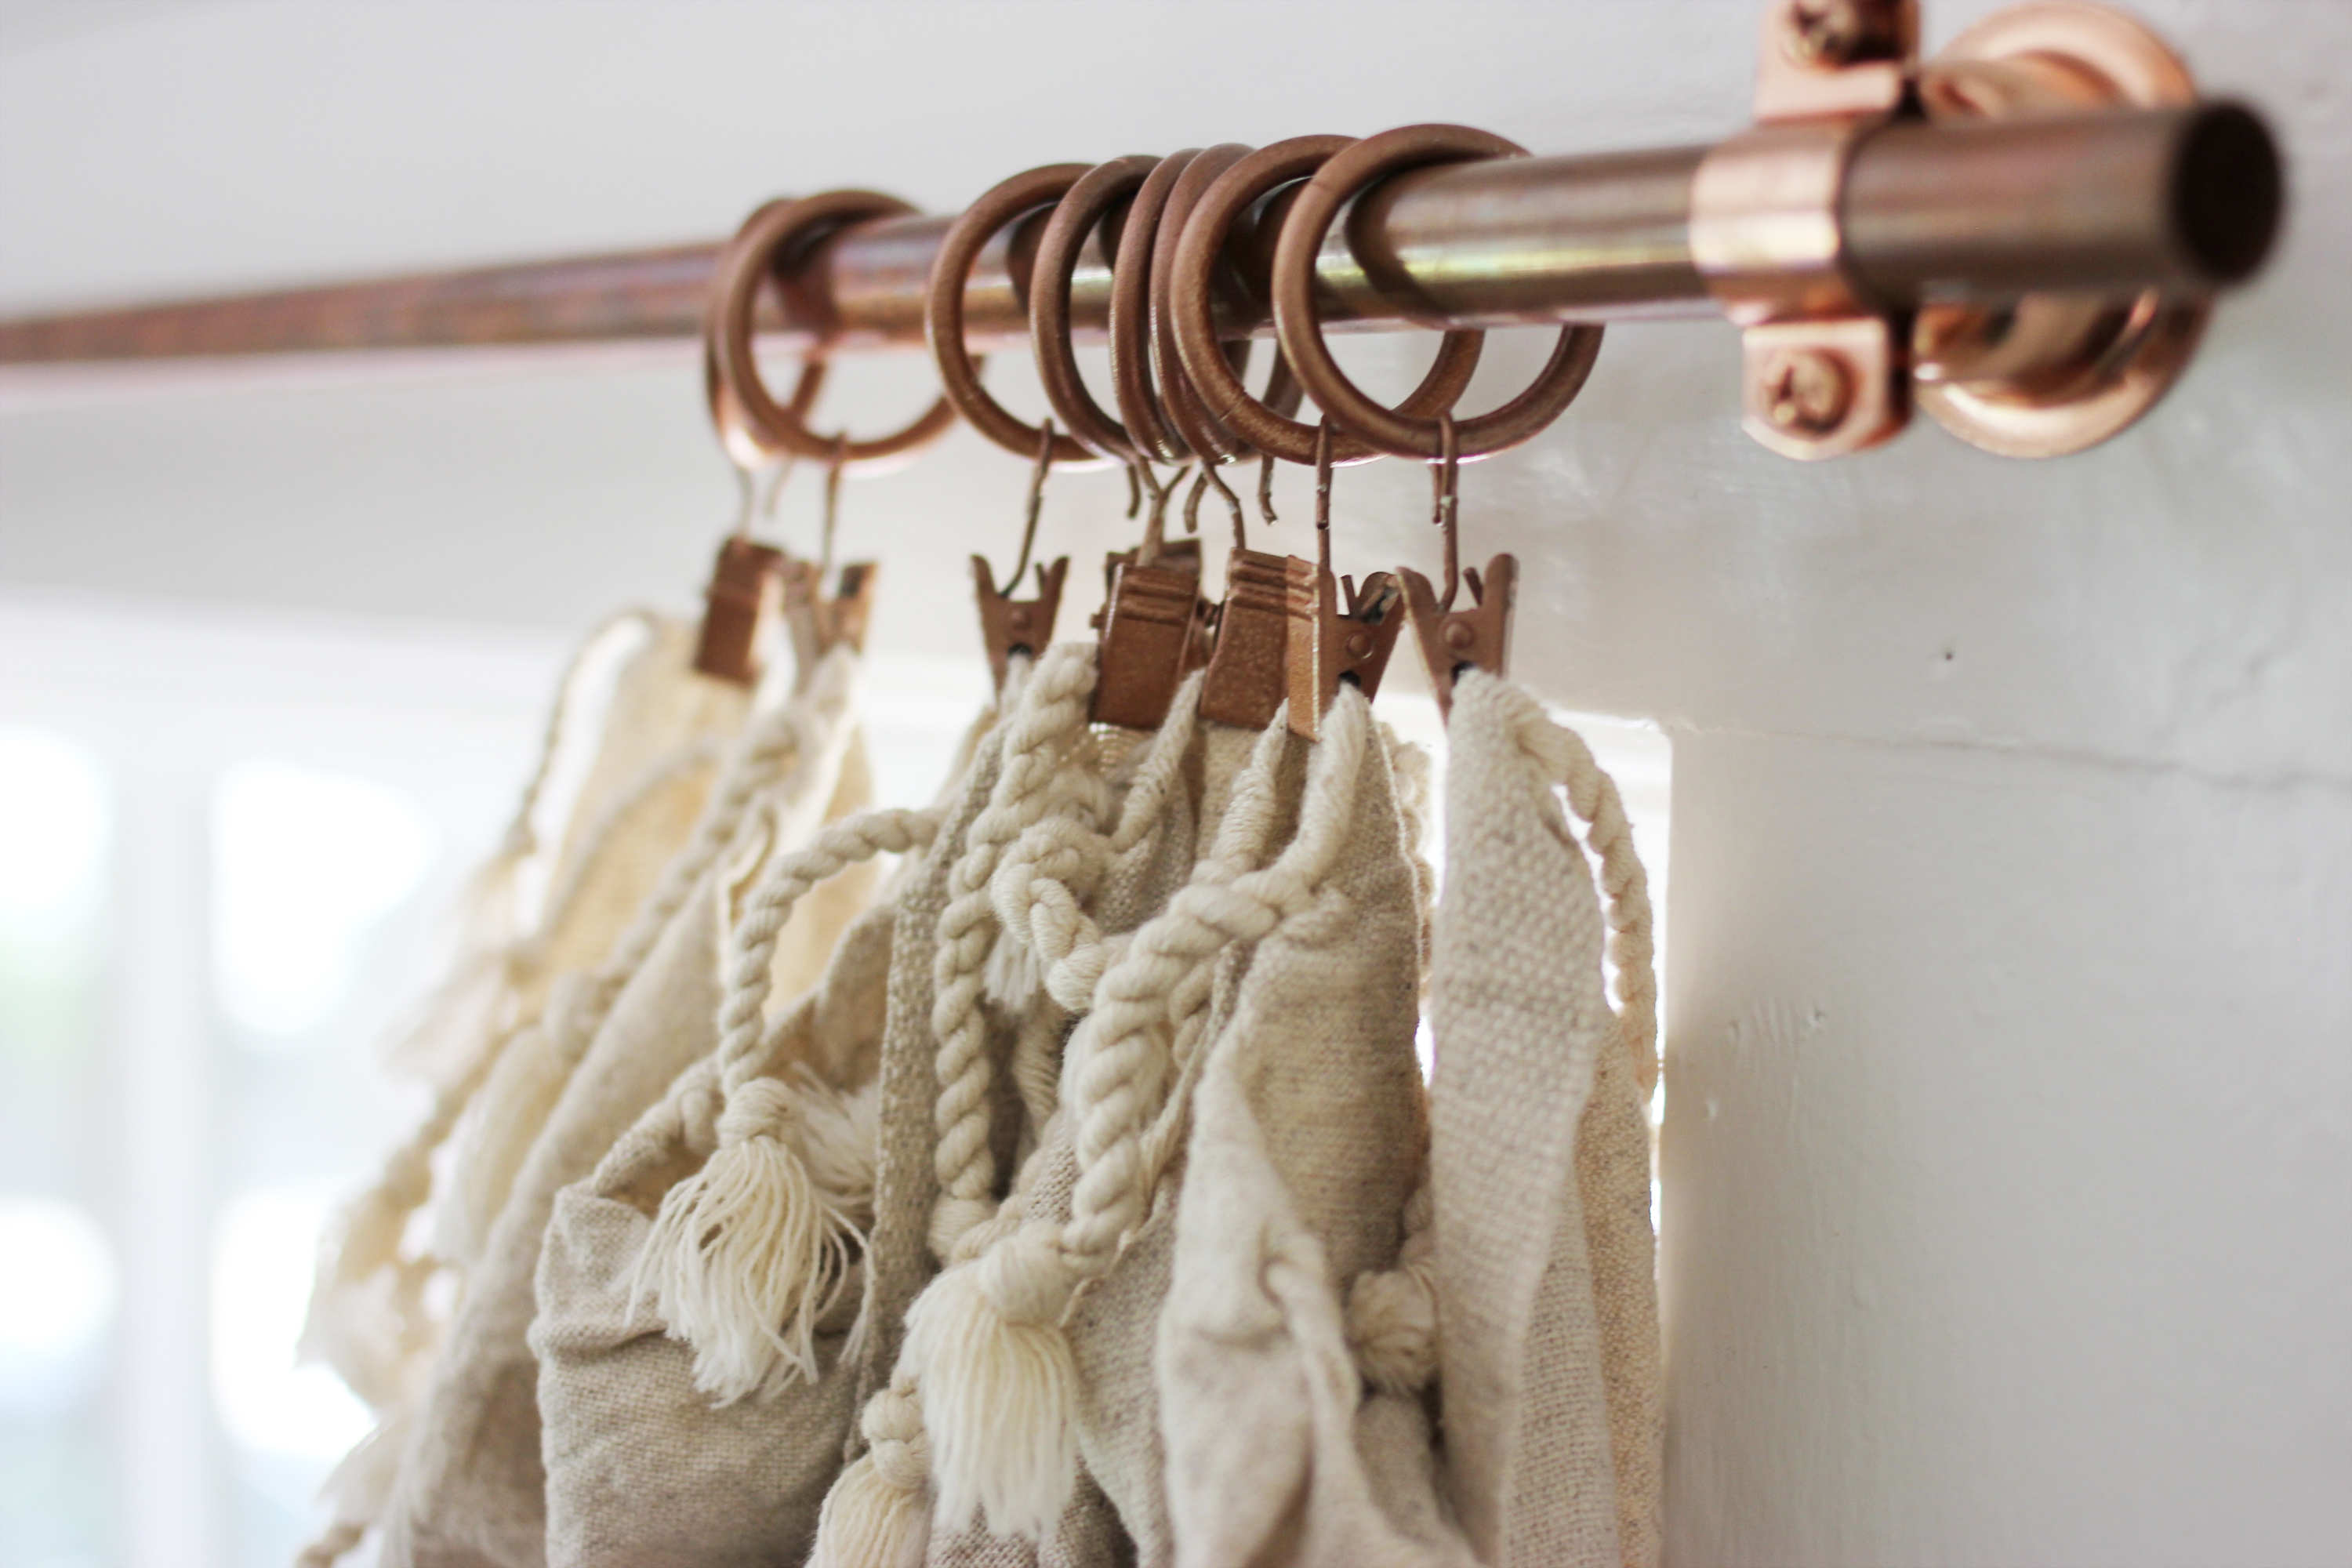 DIY affordable copper curtain rods (via www.apartmenttherapy.com)